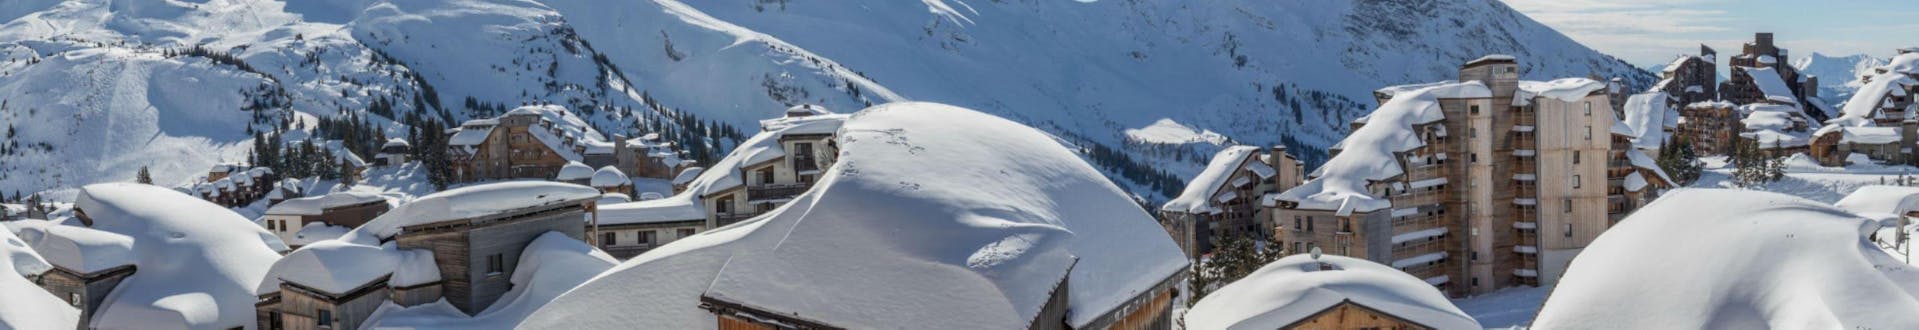 A panoramic view of the snow-covered mountain huts and hotels in the French ski resort of Avoriaz, where local ski schools offer a wide selection of ski lessons. 